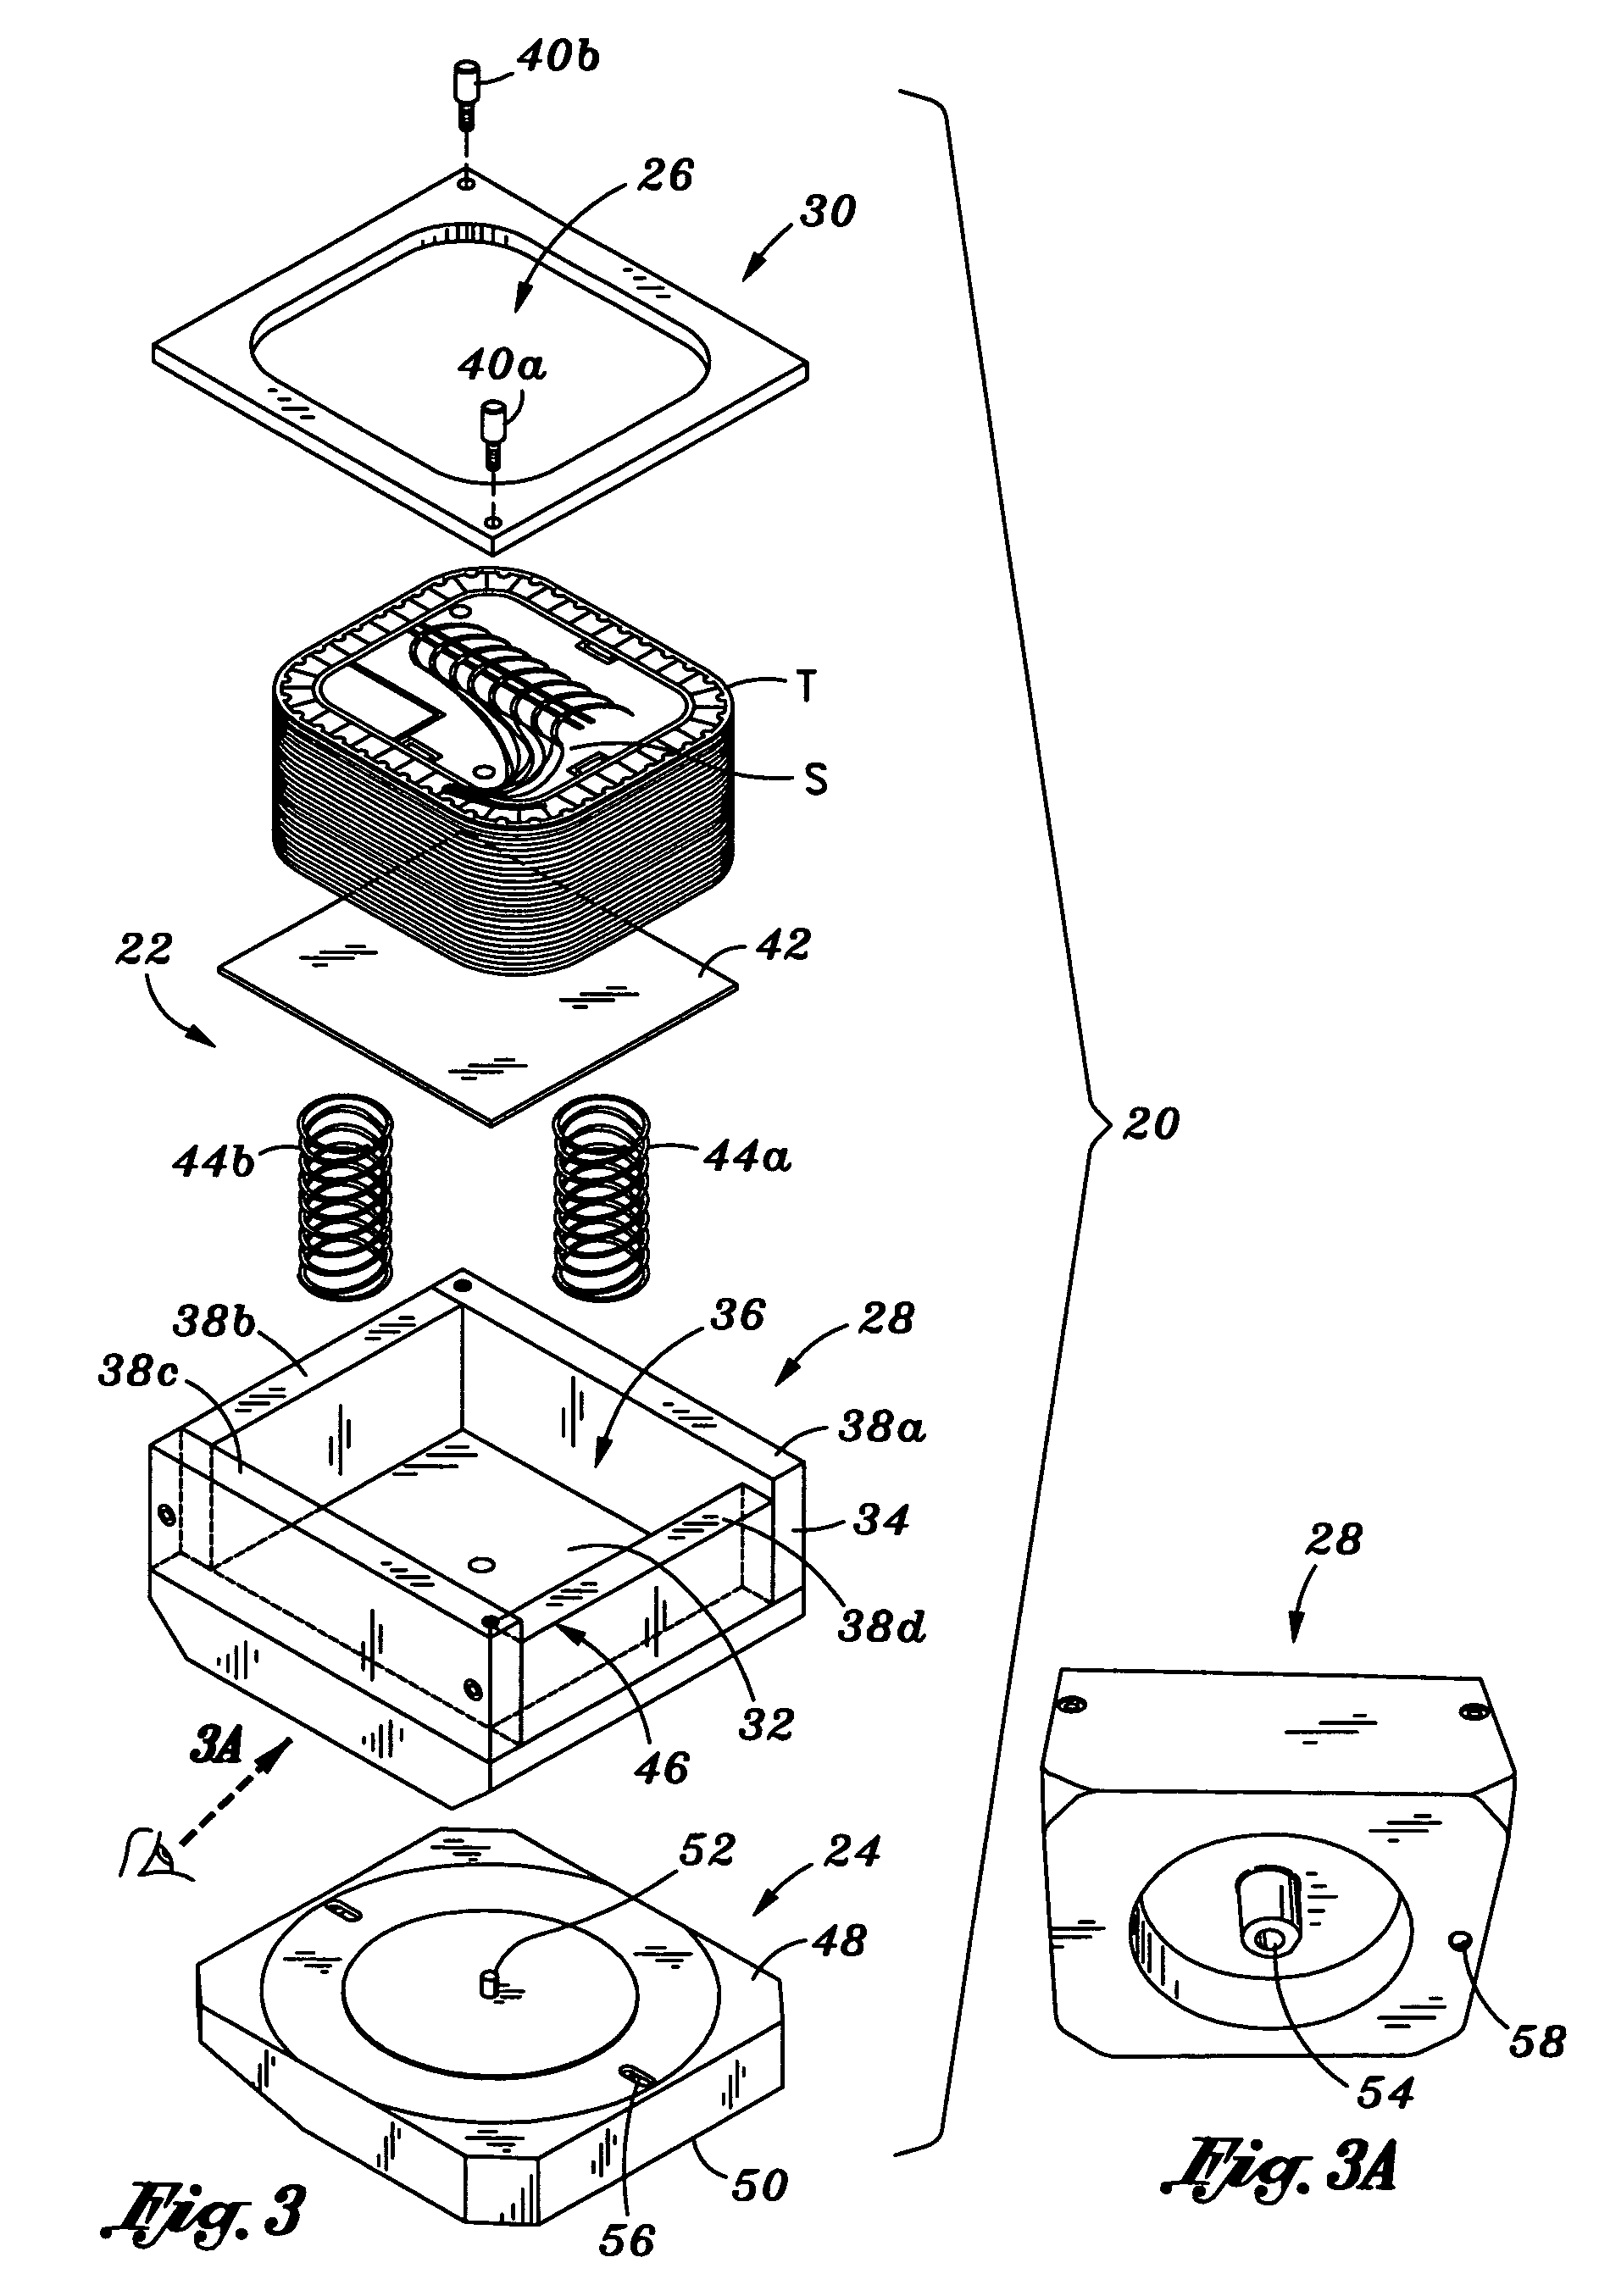 Method of retaining suture packages for the dispensing of sutures there from